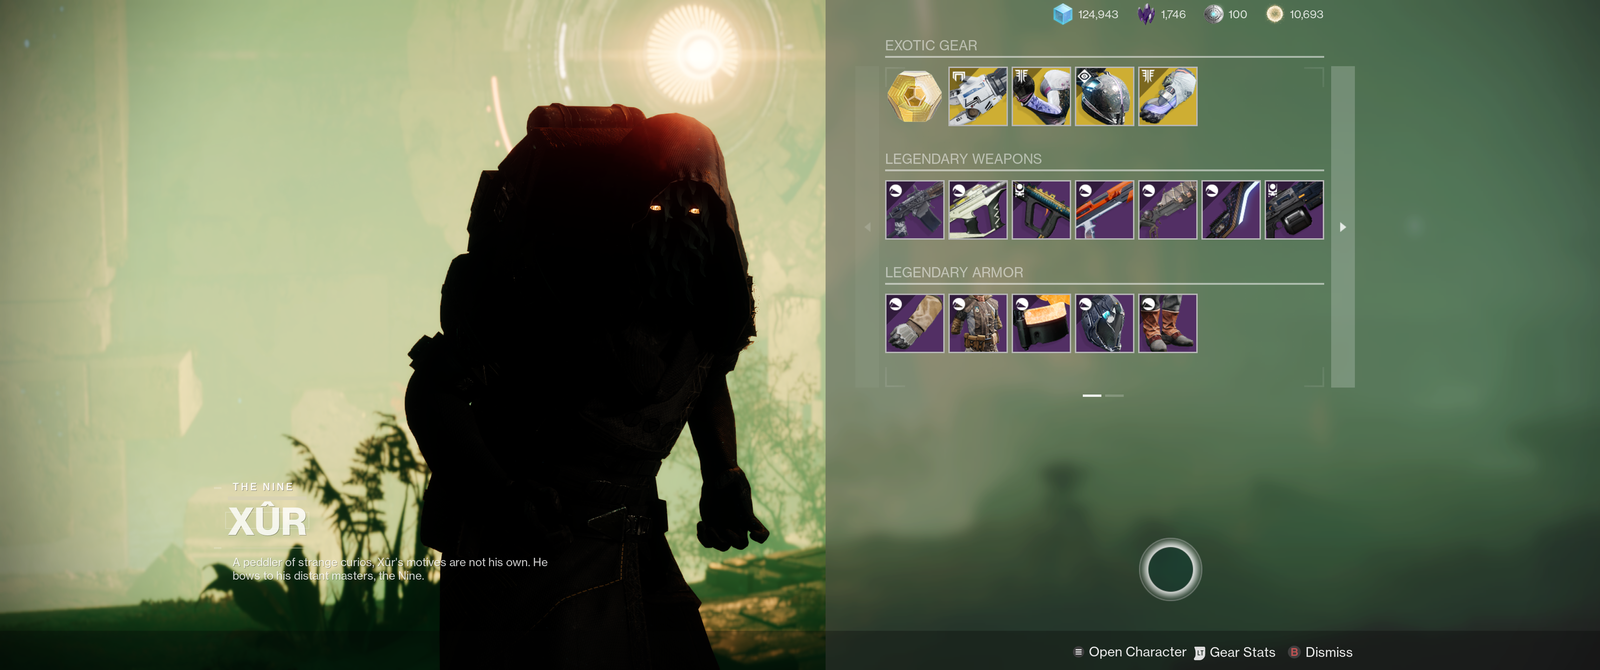 Xur recommendations